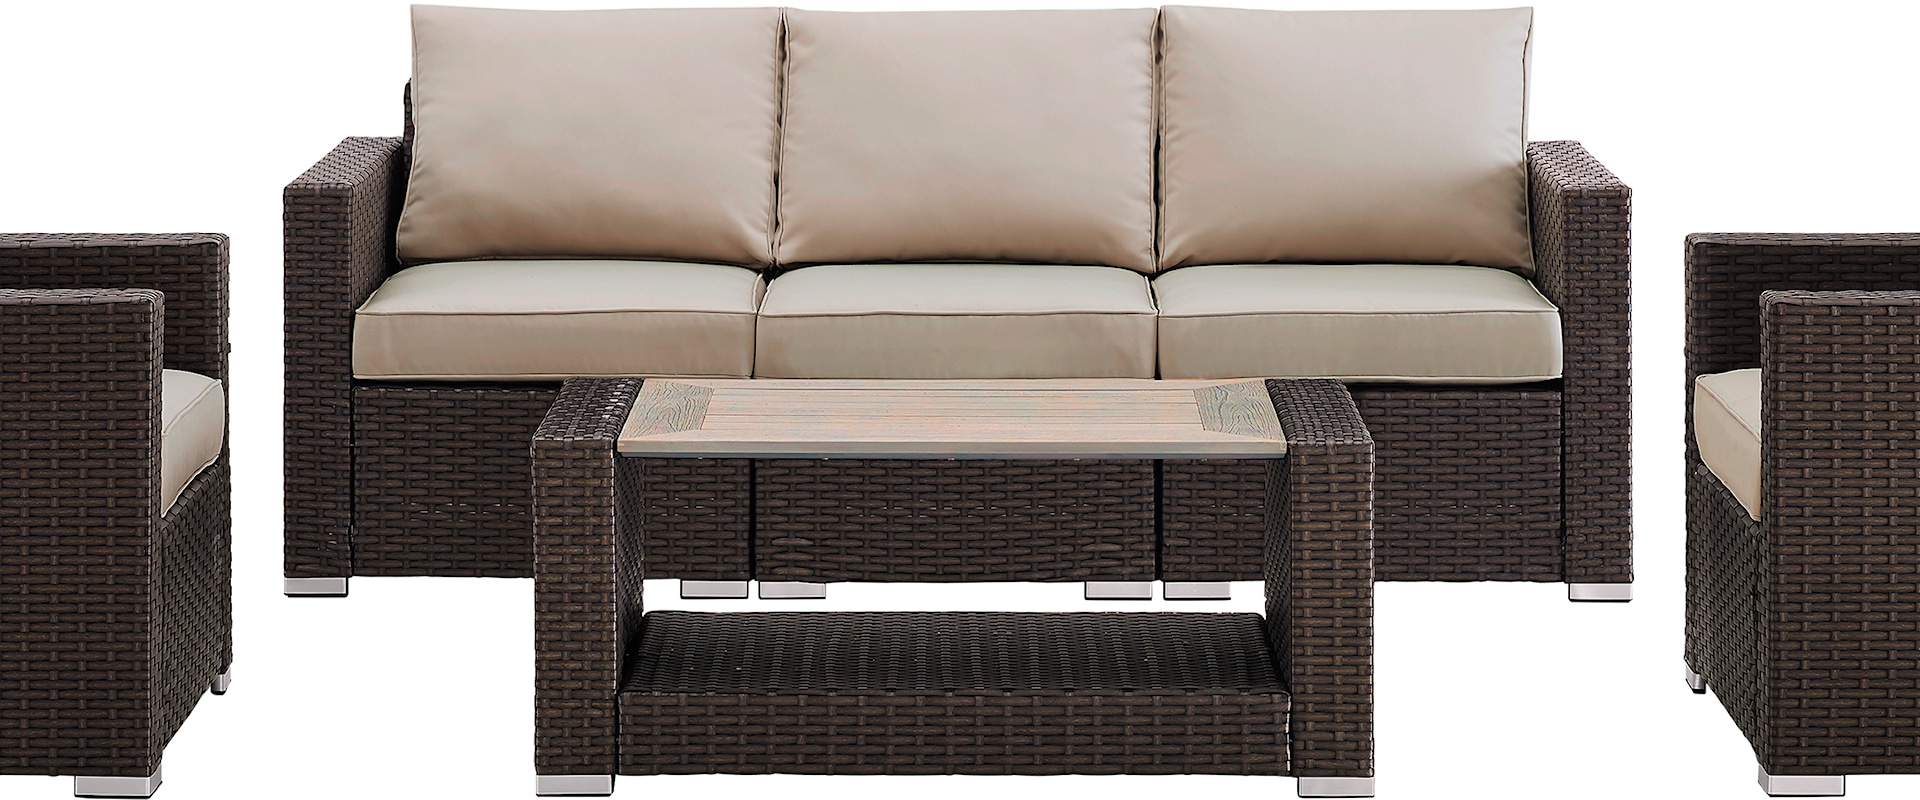 Transitional Woven Upholstered 4 Piece Outdoor Entertaining Set in Rustic Brown / Beige